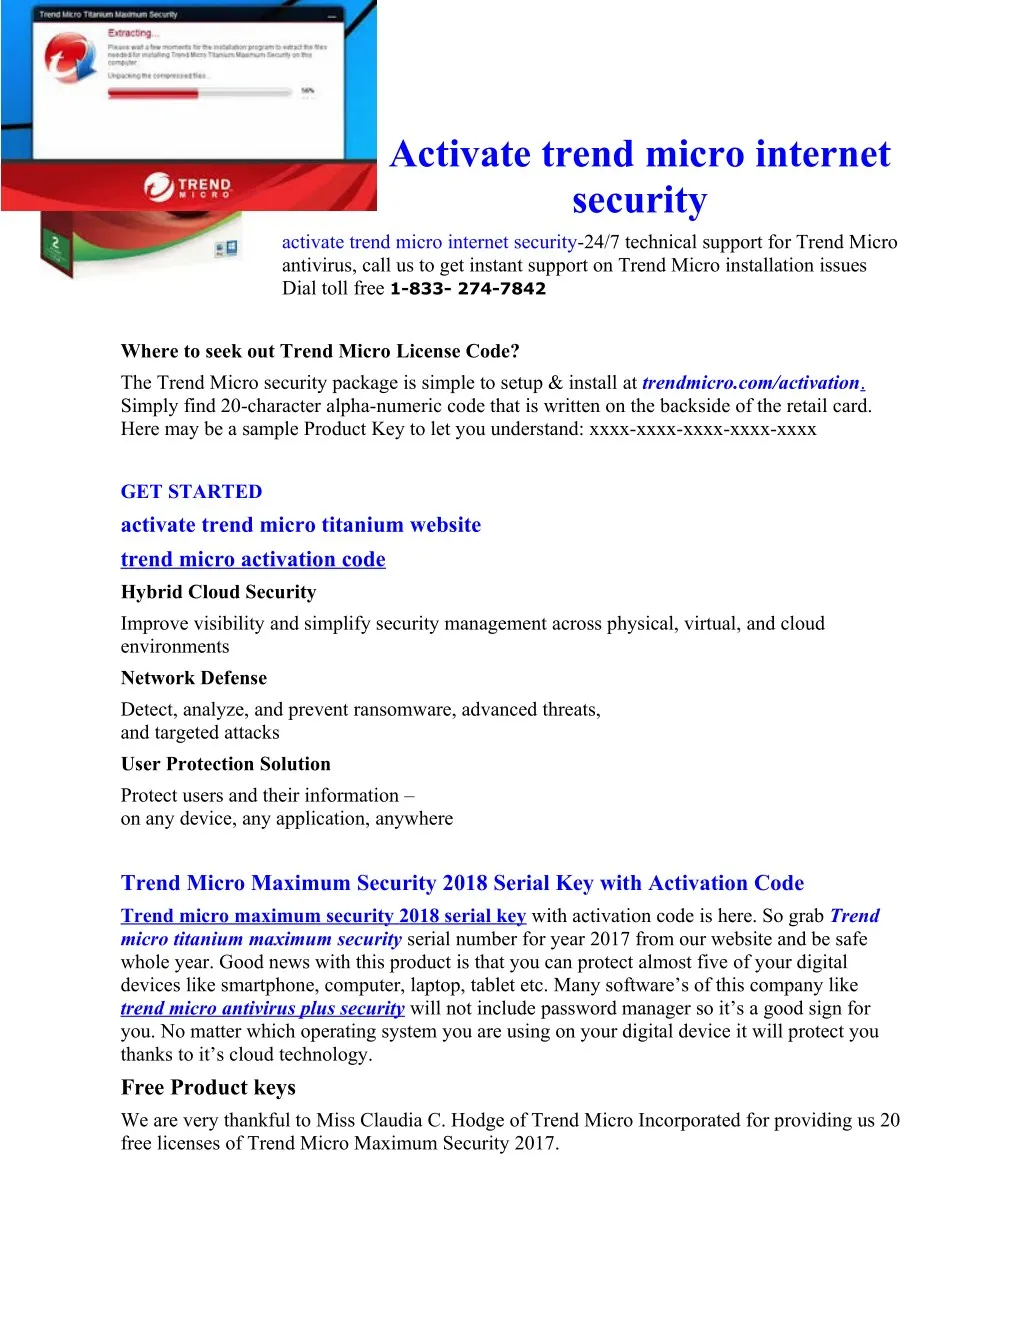 activate trend micro internet security activate n.